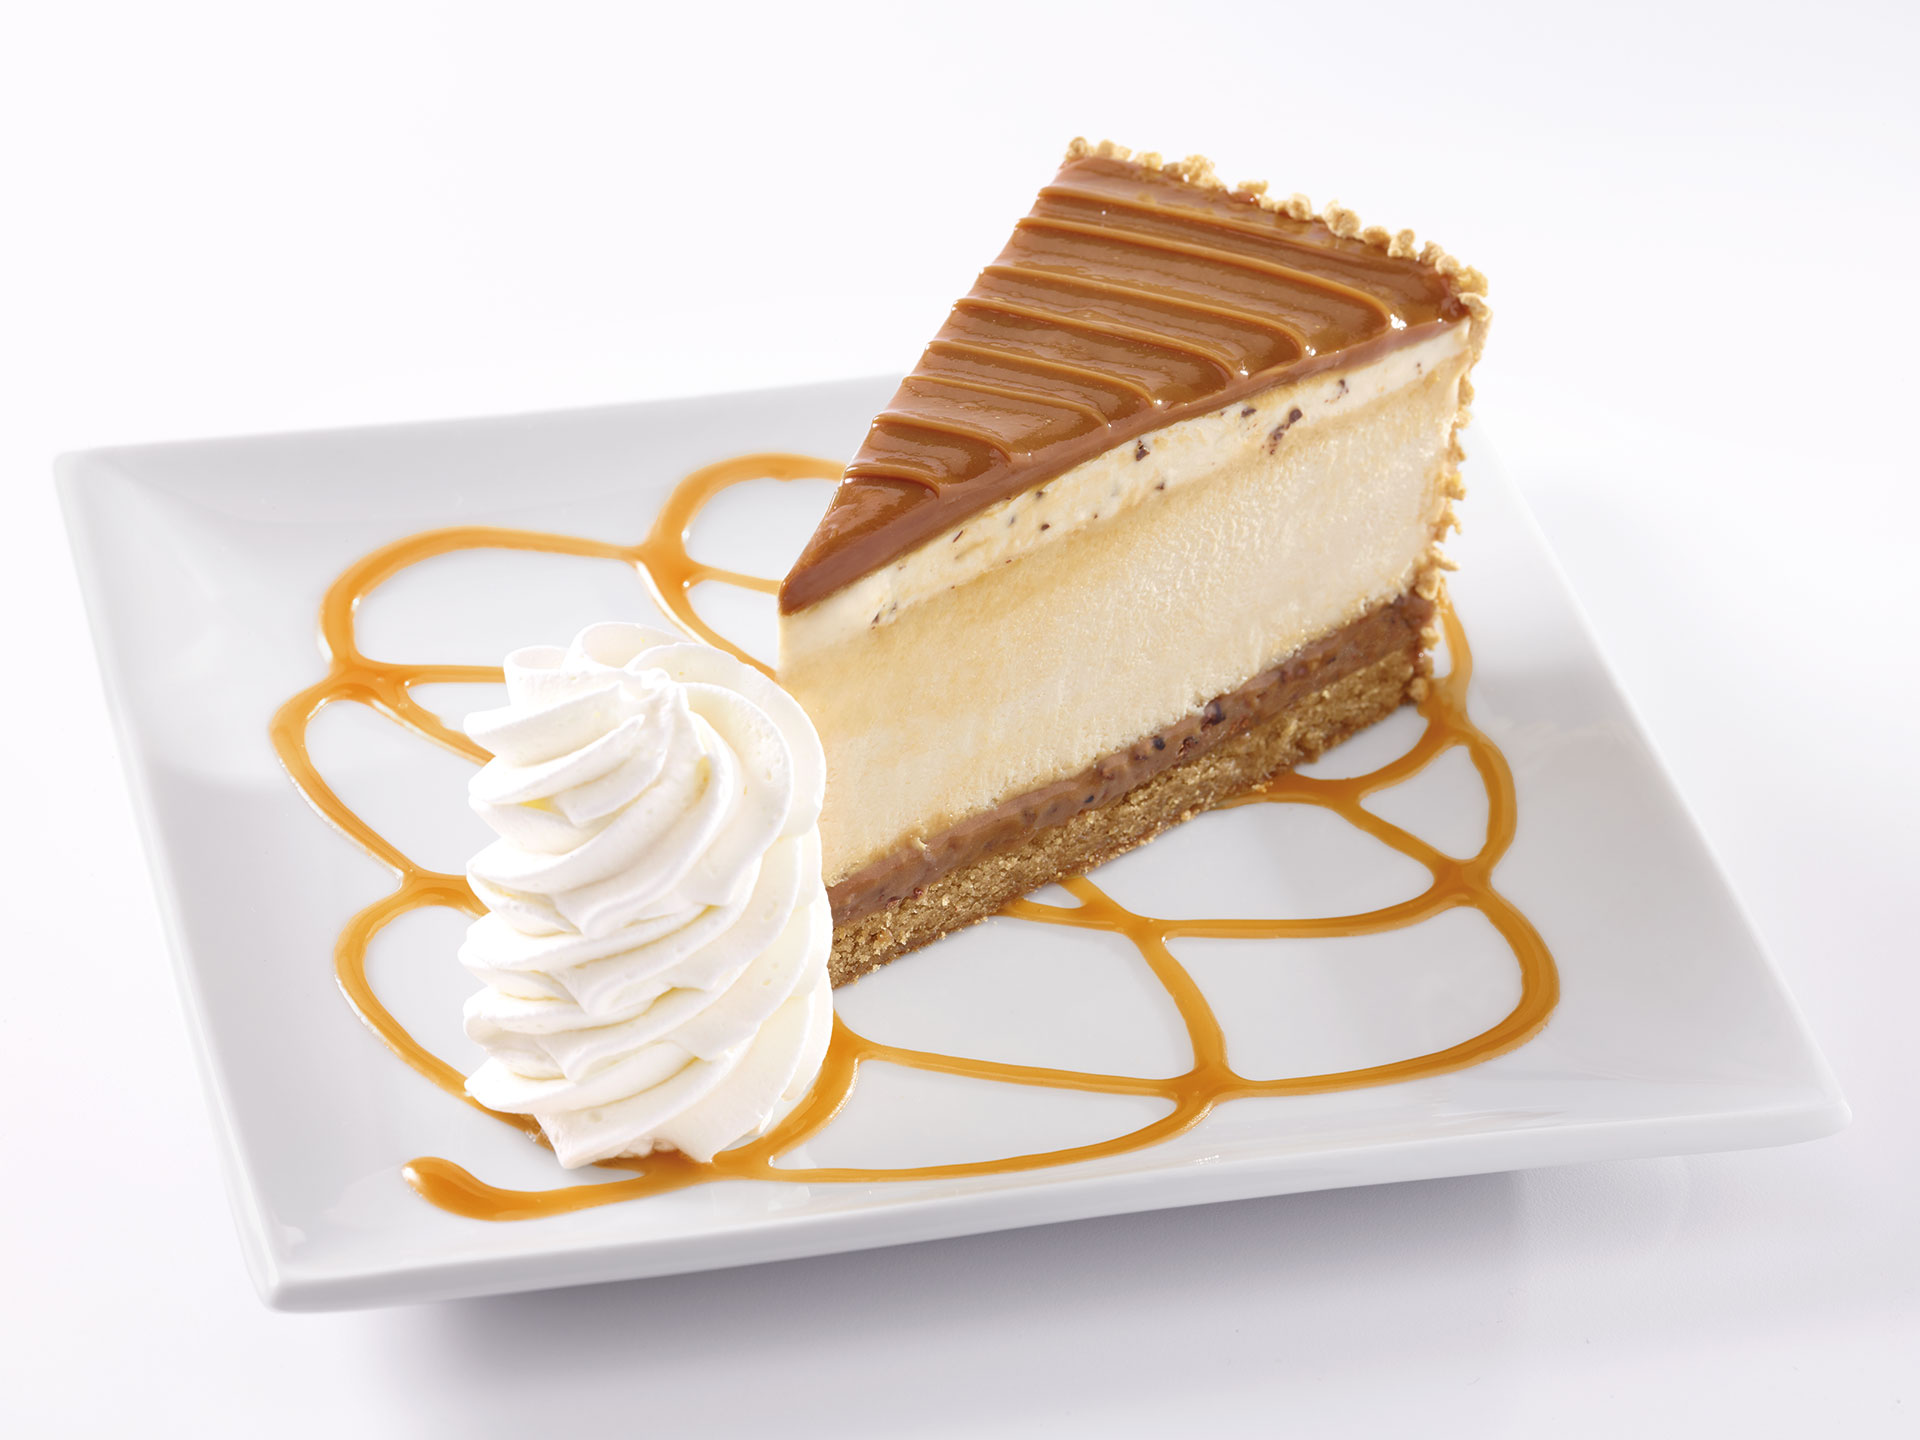 Half-Off Cheesecake Offered At Tysons Cheesecake Factory